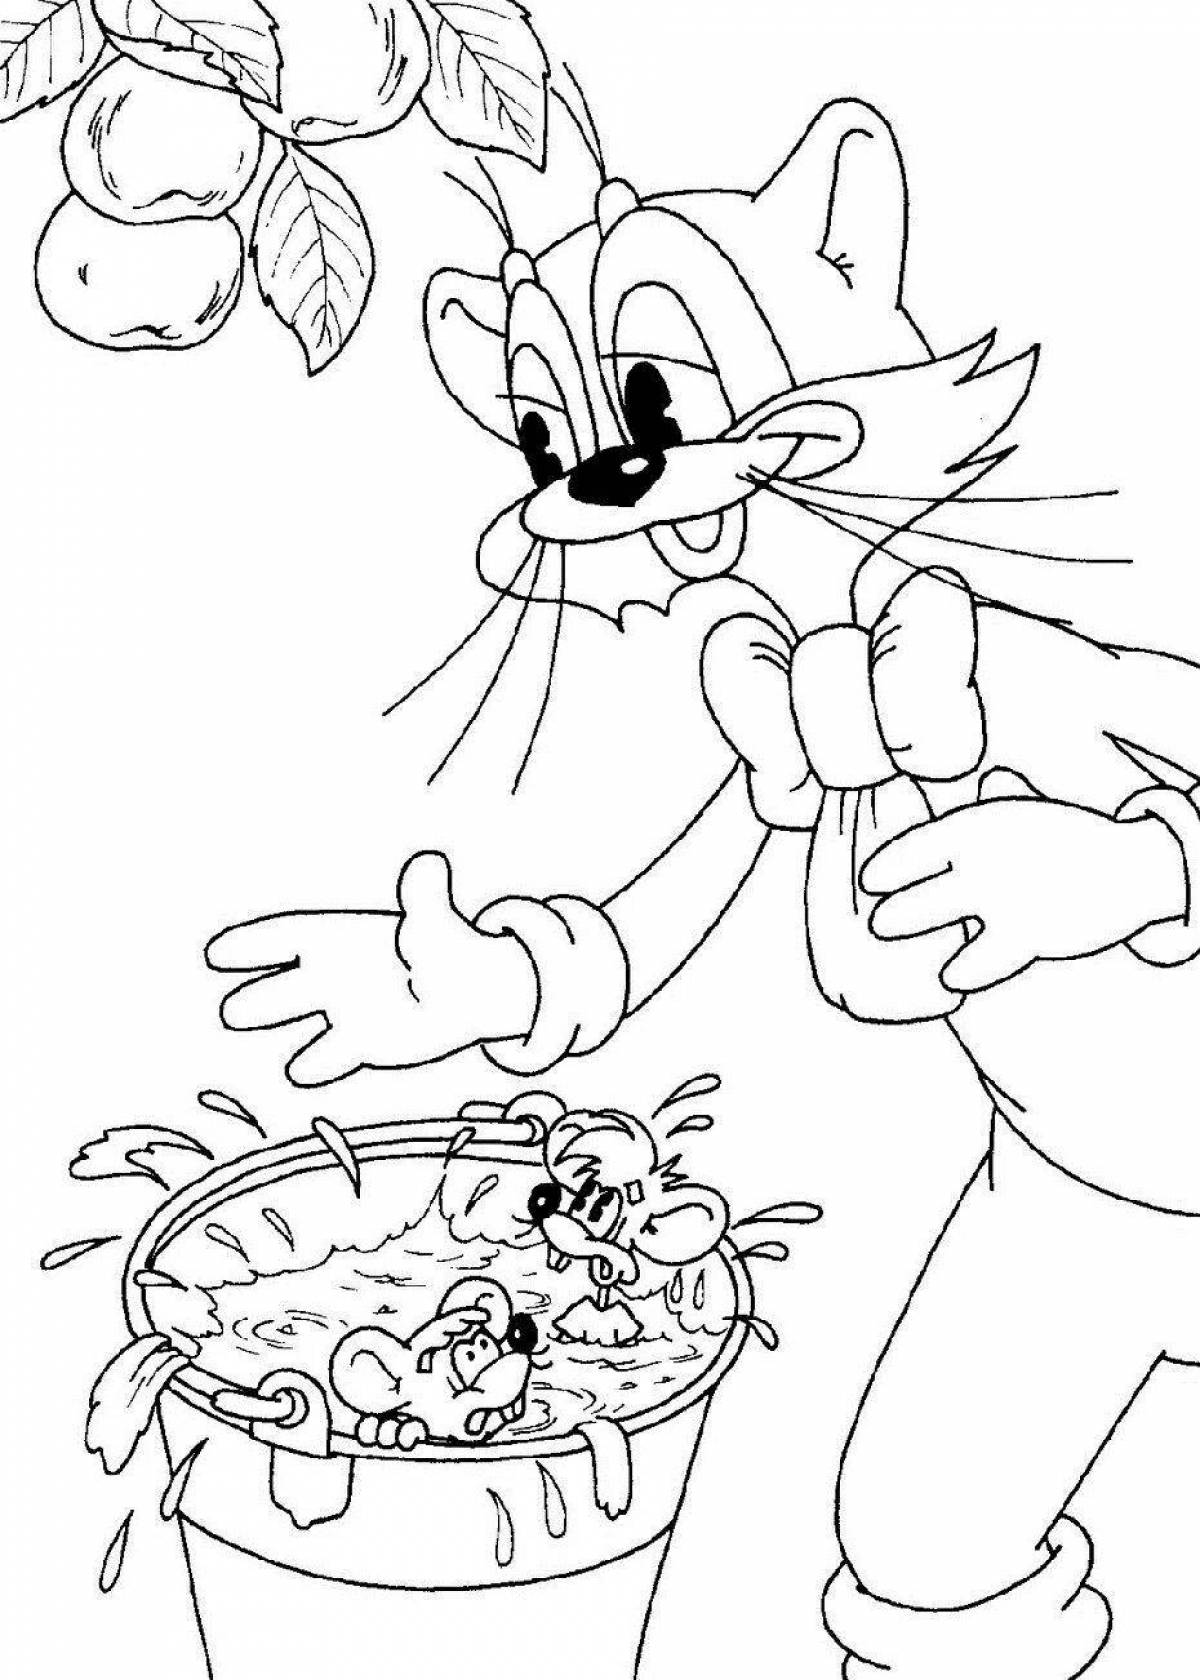 Color frenzy leopold coloring page